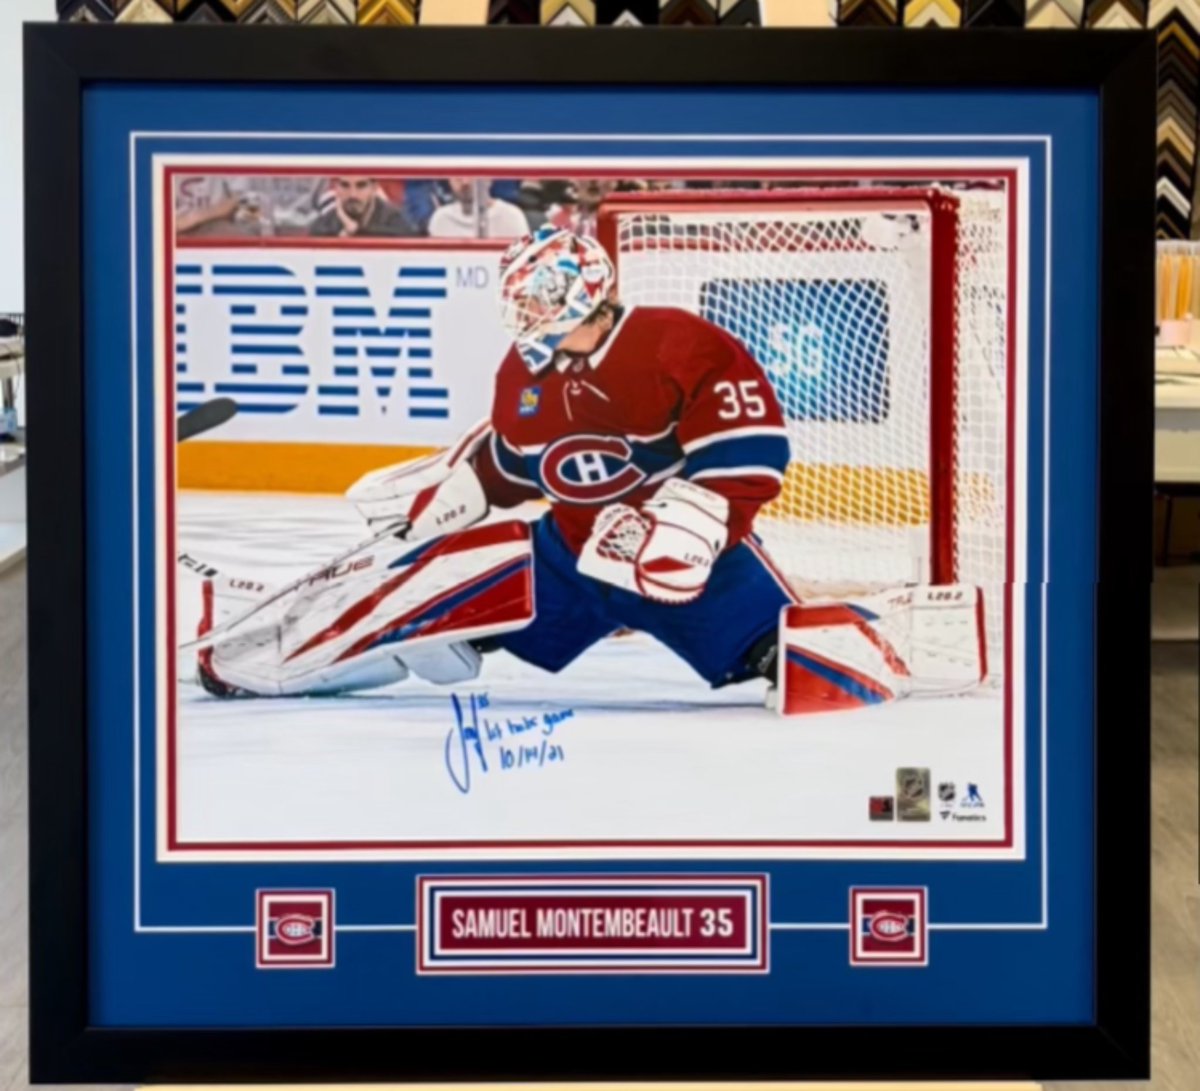 ‼️GIVEAWAY‼️ We're giving away an EXCLUSIVE signed Samuel Montembeault frame from his first NHL game in collaboration with Era Frames. There are only 5 of these frames in the world. To enter: 1) Follow @thesickpodcasts 2) Retweet this post 3) Comment 'SICK' Subscribe to our…